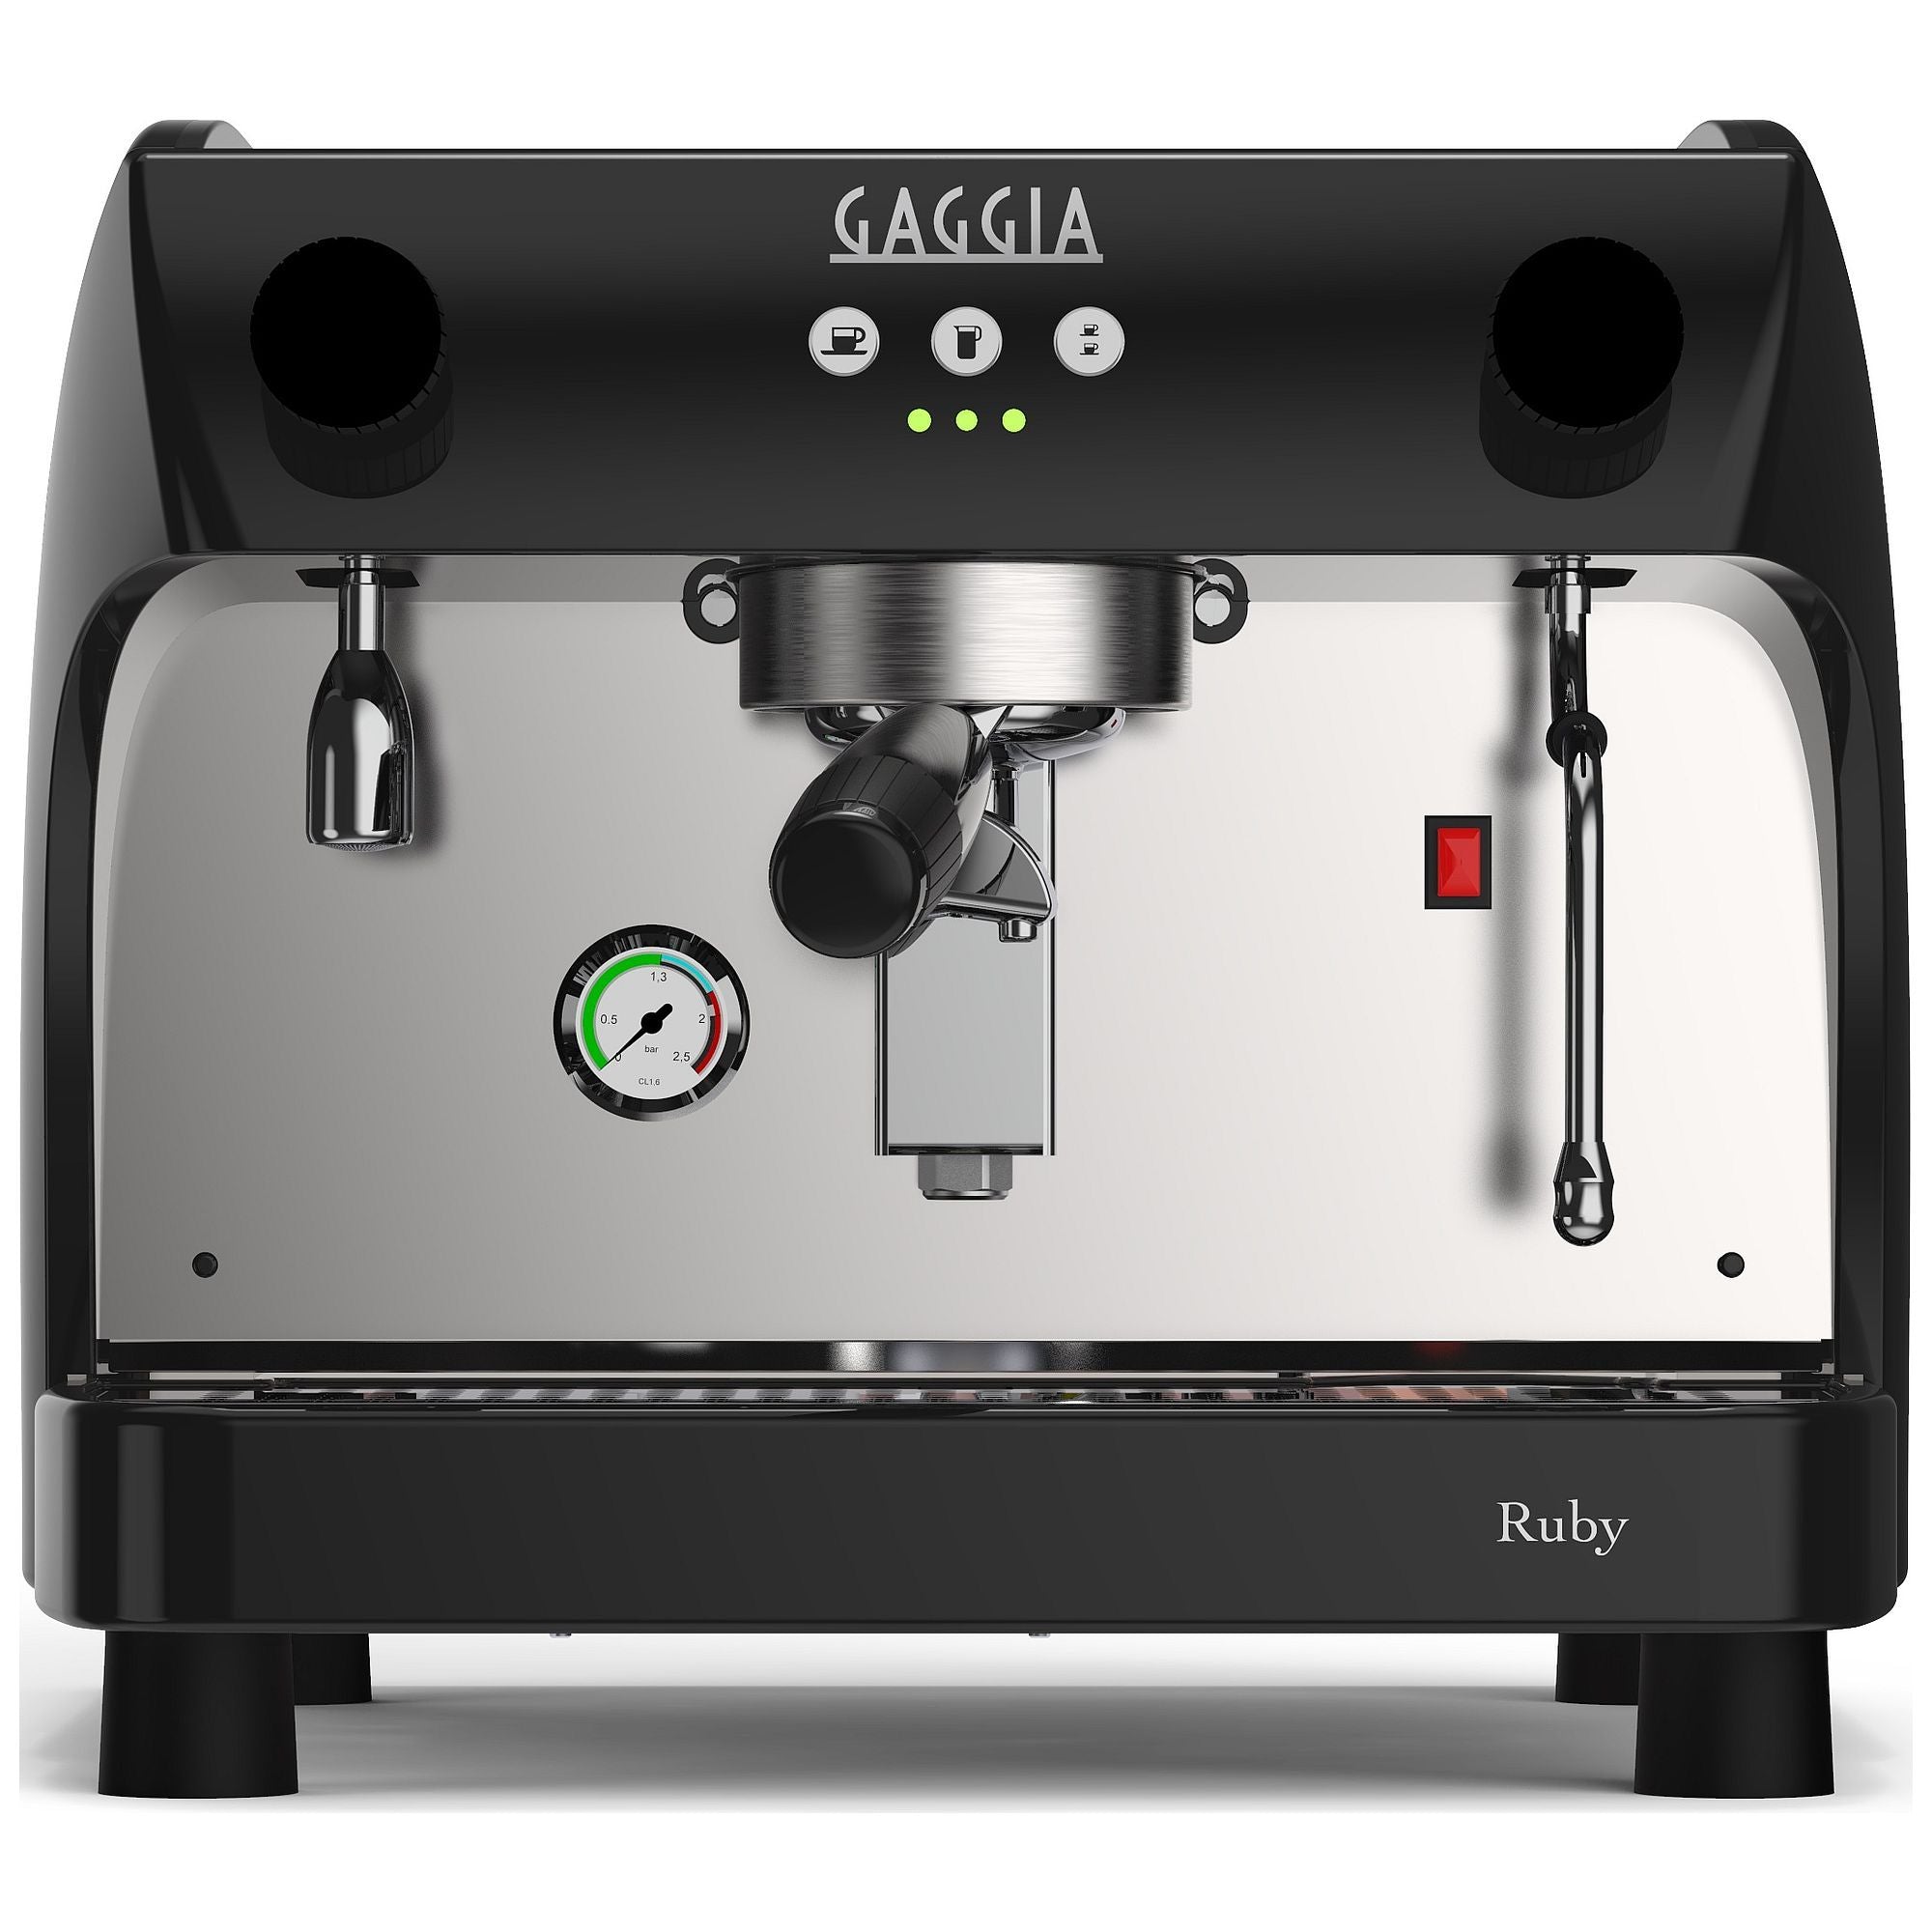 "An elegant Gaggia Ruby Pro Espresso machine with polished stainless steel and black side panels, a sleek control panel featuring various brewing options, a steam wand for frothing milk, and a portafilter ready for a perfect shot of espresso."